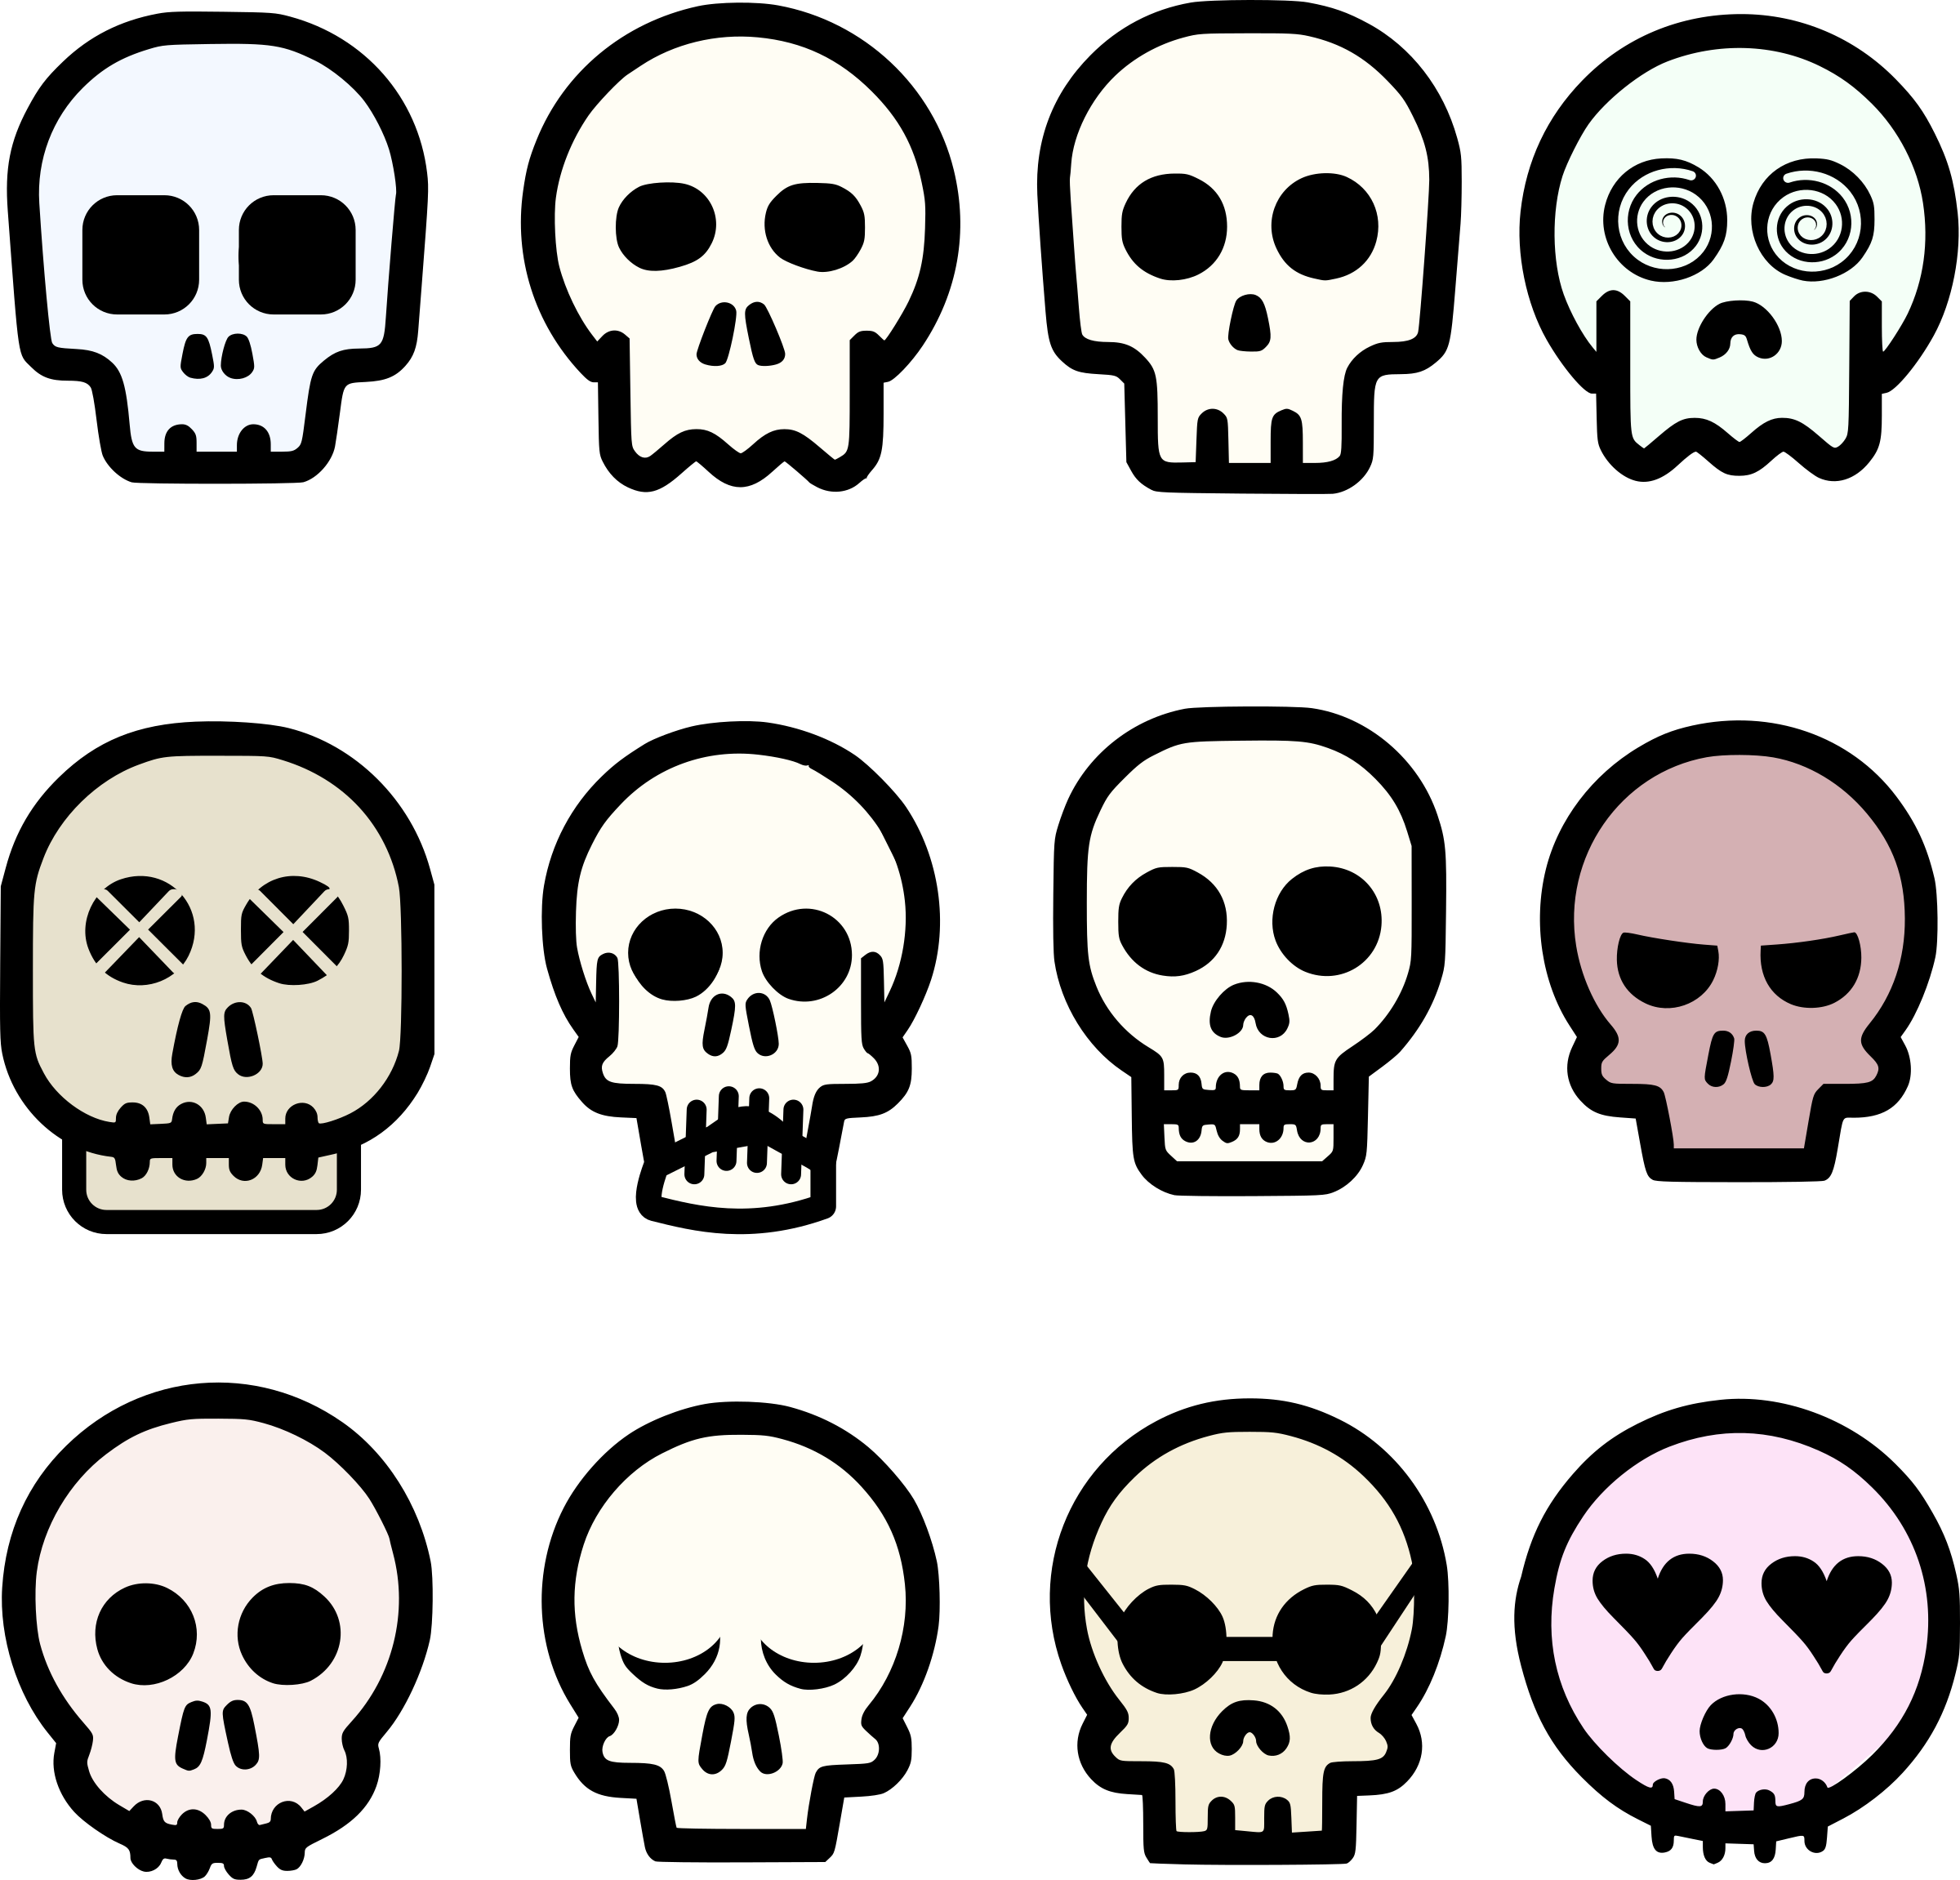 Download Skull Emoji Vector Clipart Image - Free Skull Cartoon Vector PNG  Image with No Background 